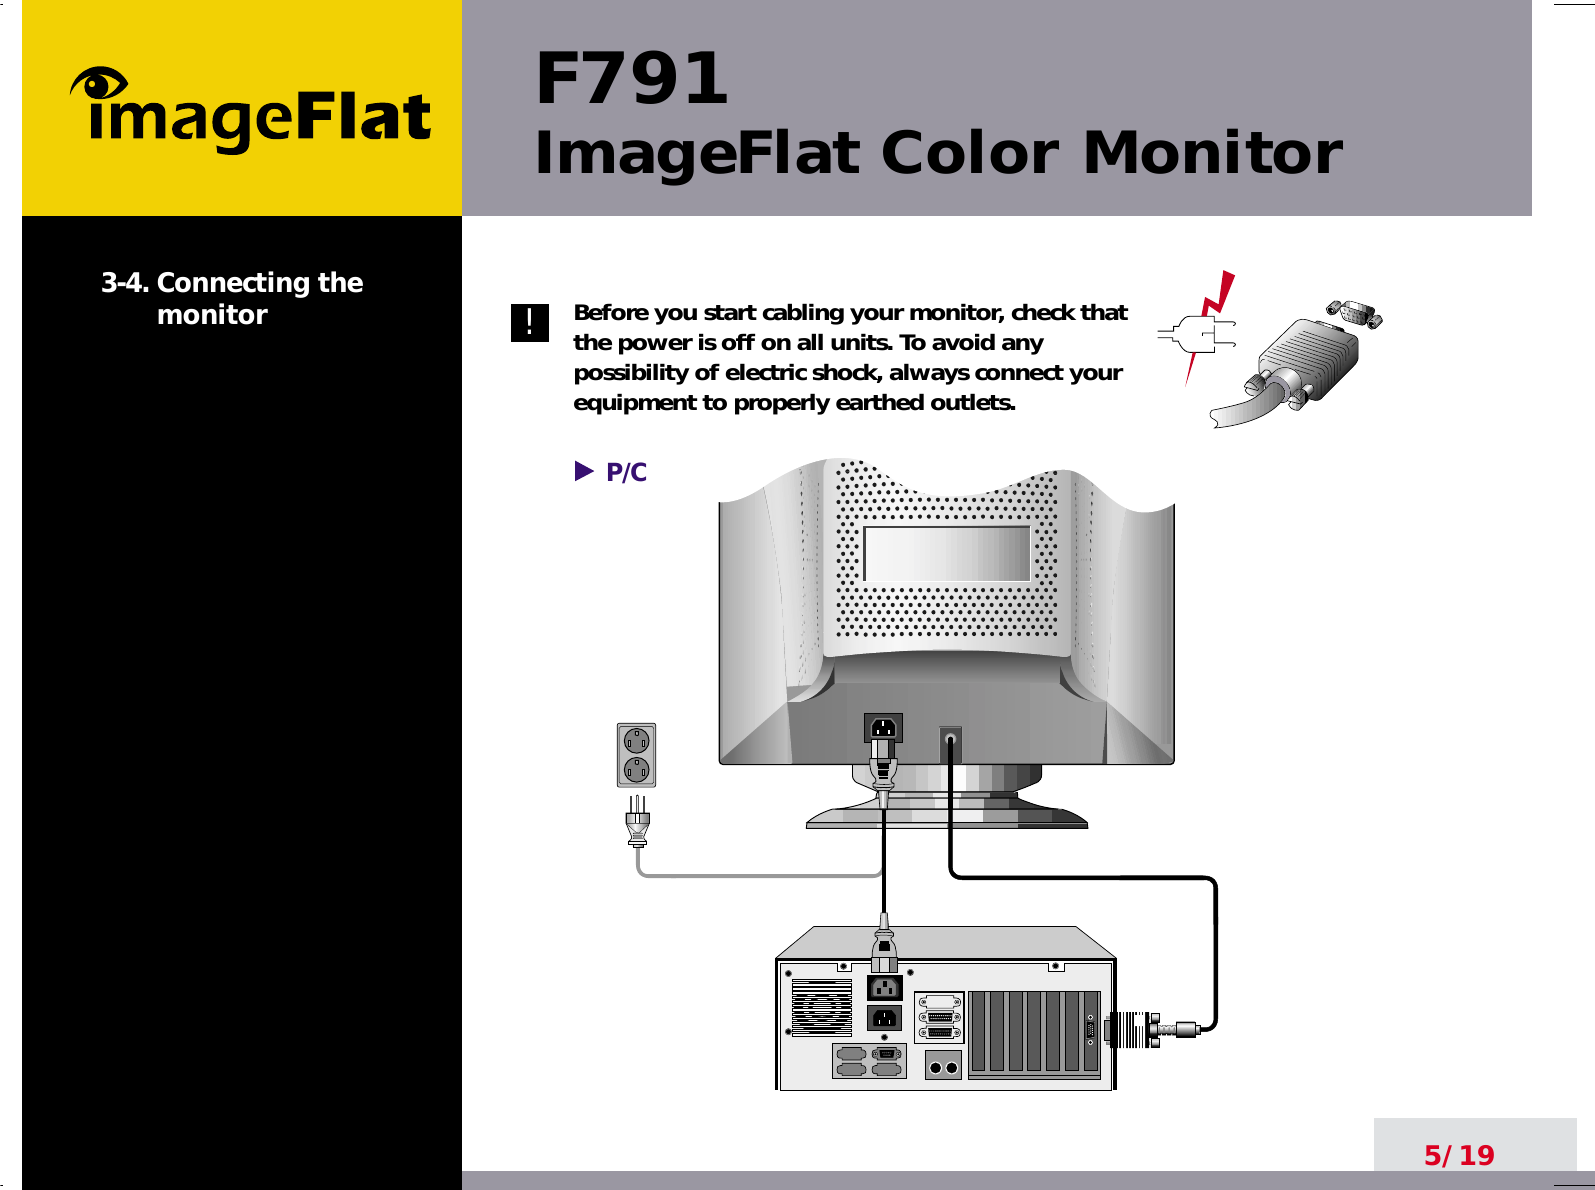 F791ImageFlat Color Monitor5/193-4. Connecting themonitor Before you start cabling your monitor, check thatthe power is off on all units. To avoid anypossibility of electric shock, always connect yourequipment to properly earthed outlets.!P/C